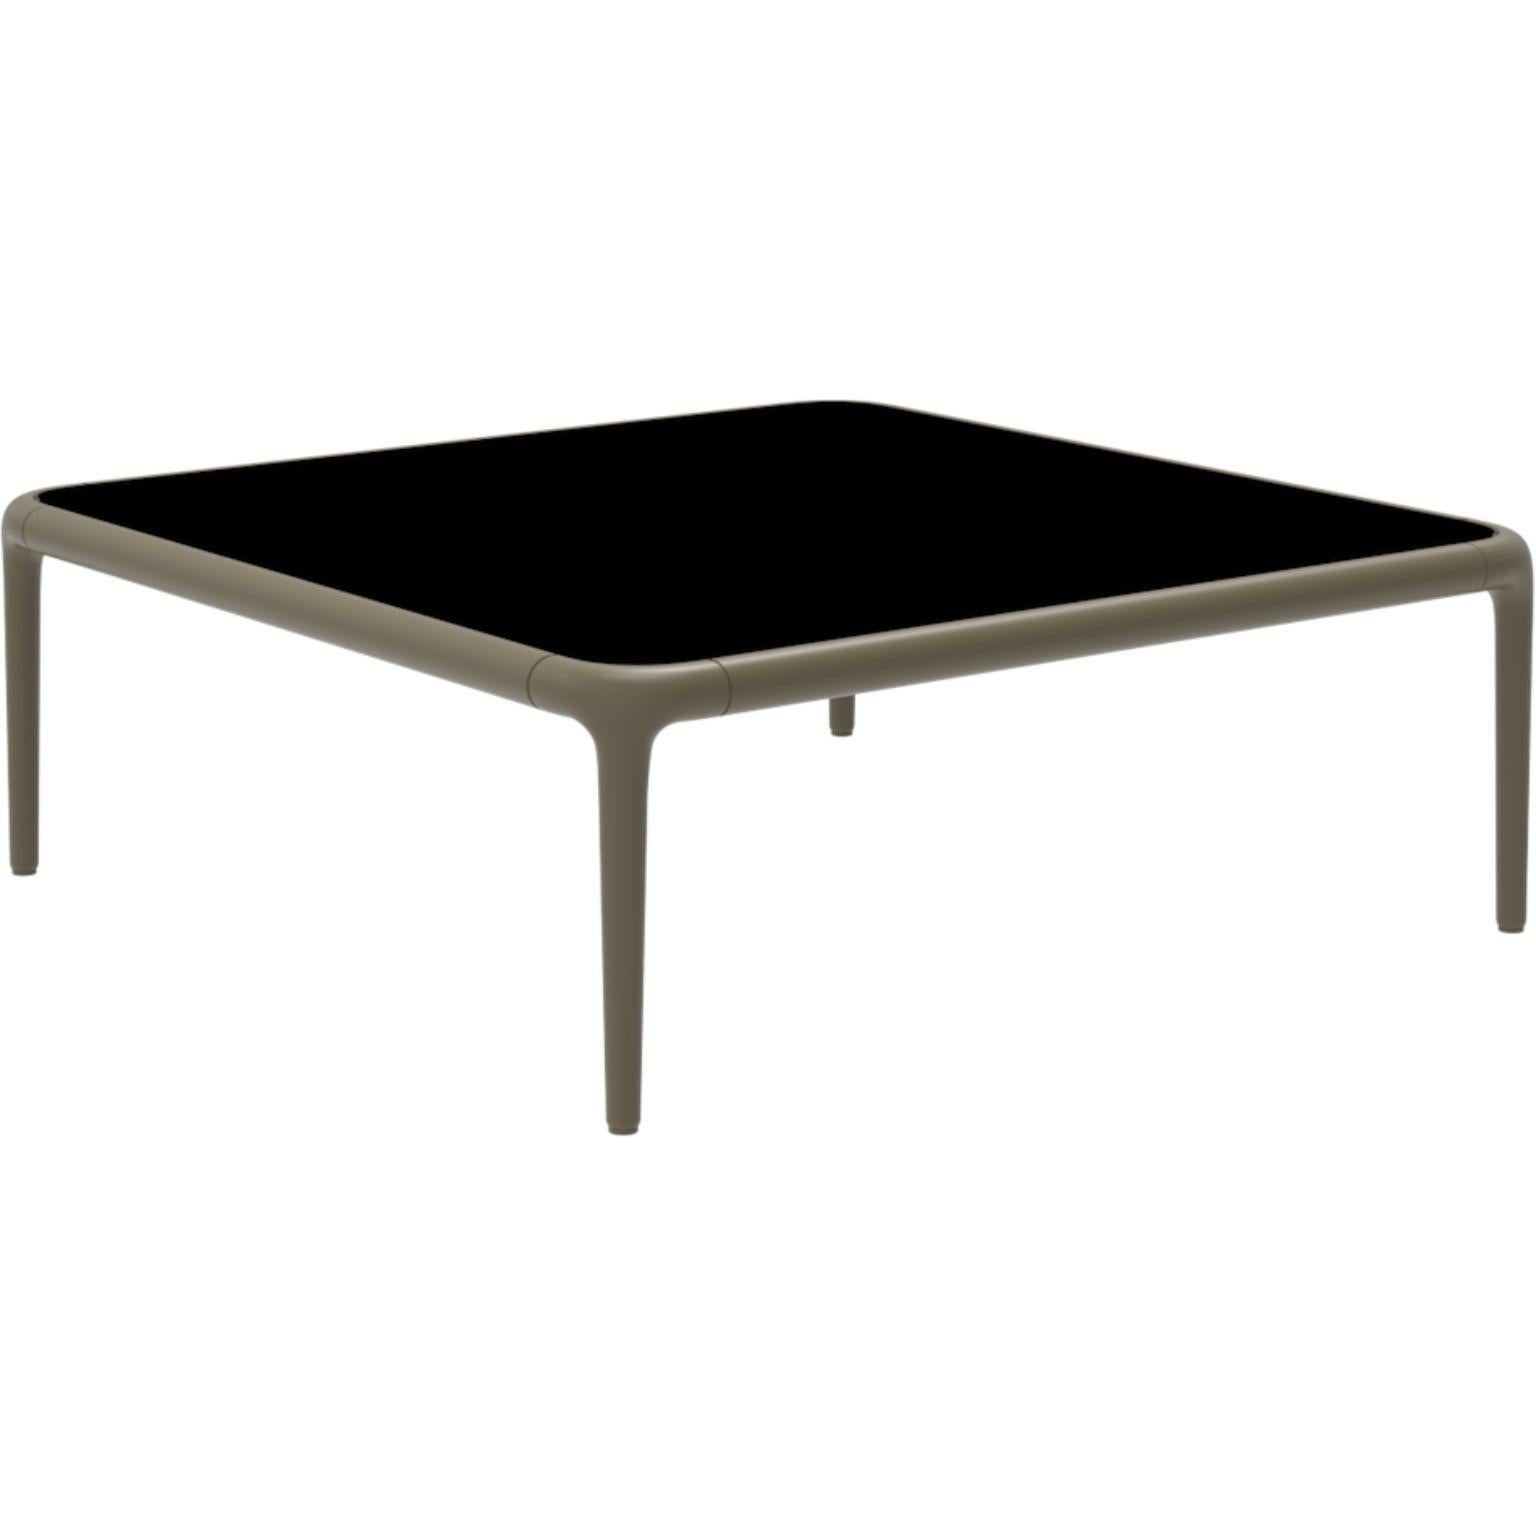 Xaloc Bronze coffee table 80 with glass top by Mowee.
Dimensions: D80 x W80 x H28 cm.
Materials: Aluminum, tinted tempered glass top.
Also available in different aluminum colors and finishes (HPL Black Edge or Neolith). 

Xaloc synthesizes the